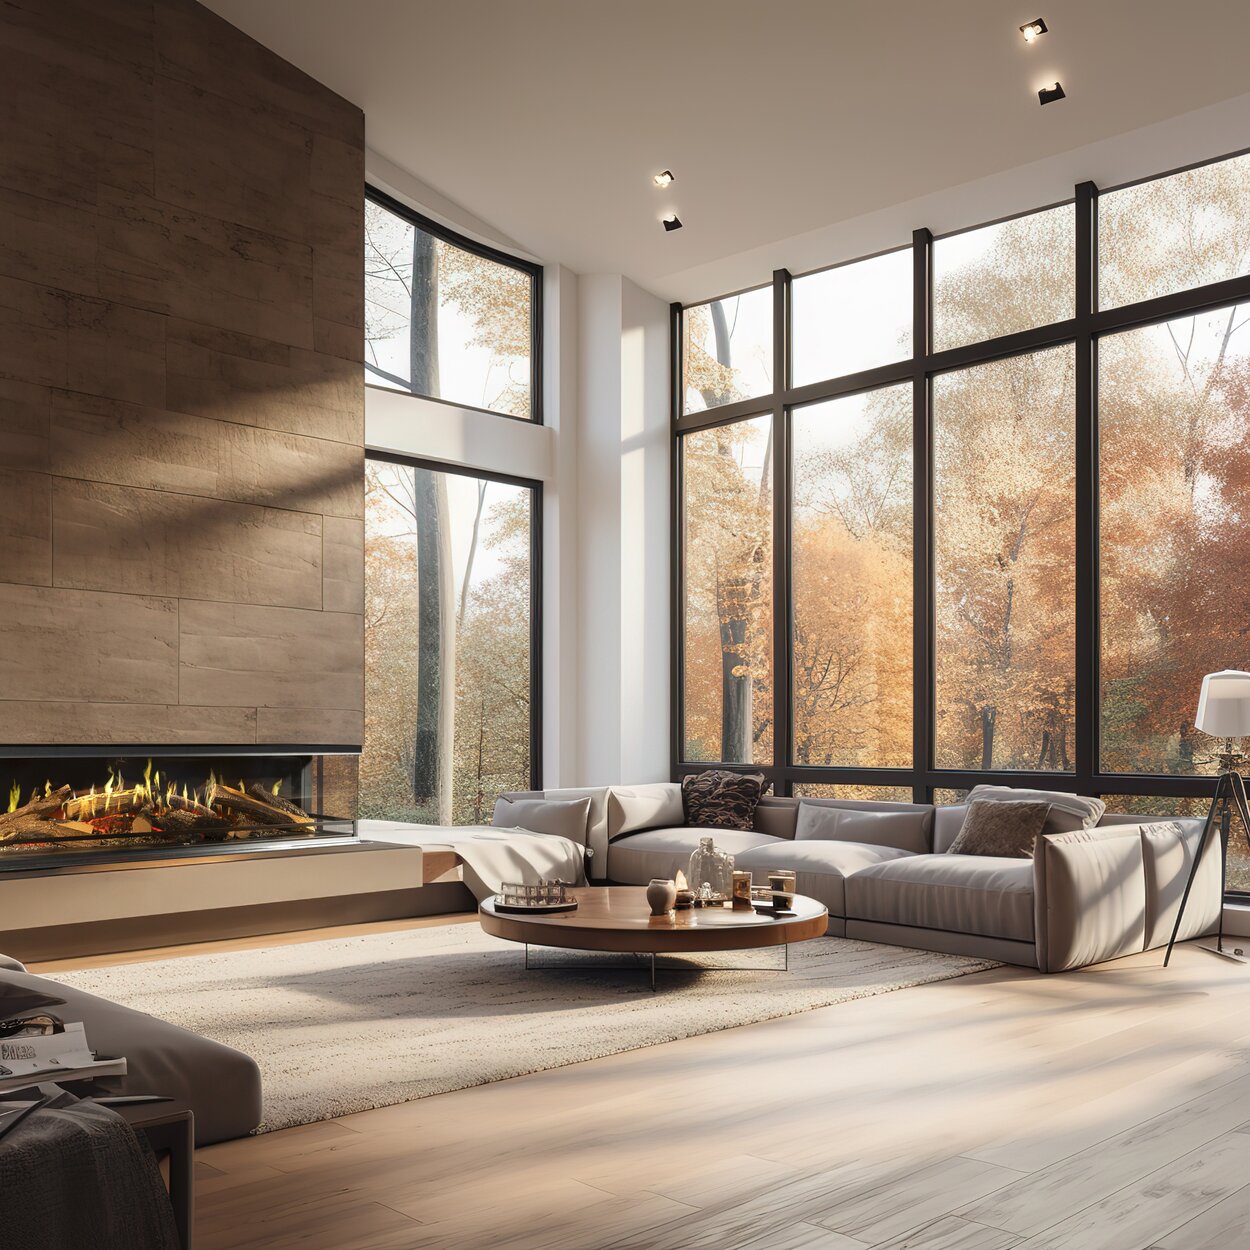 The E-One 190 S electric fireplace in a modern loft with large windows, wooden floor and built into a stone element.